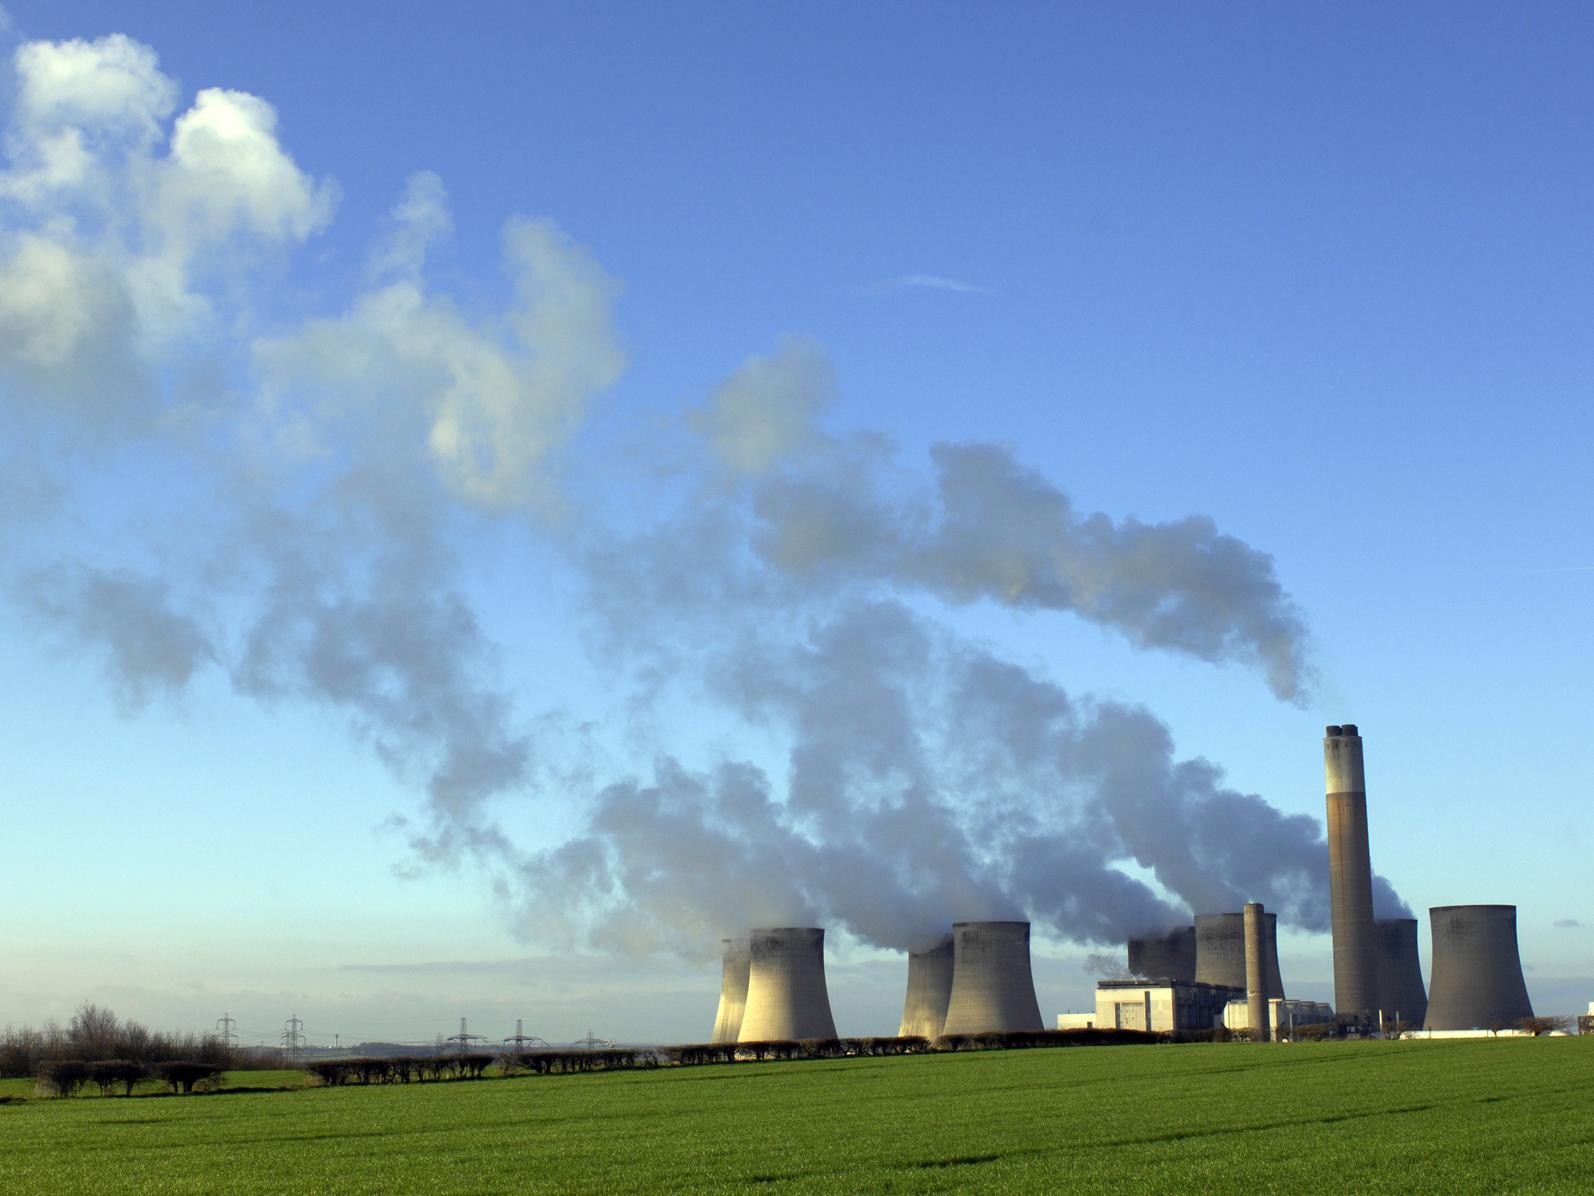 Many experts have called for the UK to bring in a "net zero" emissions target, meaning greenhouse gas emissions are balanced by the removal of greenhouse gases from the atmosphere